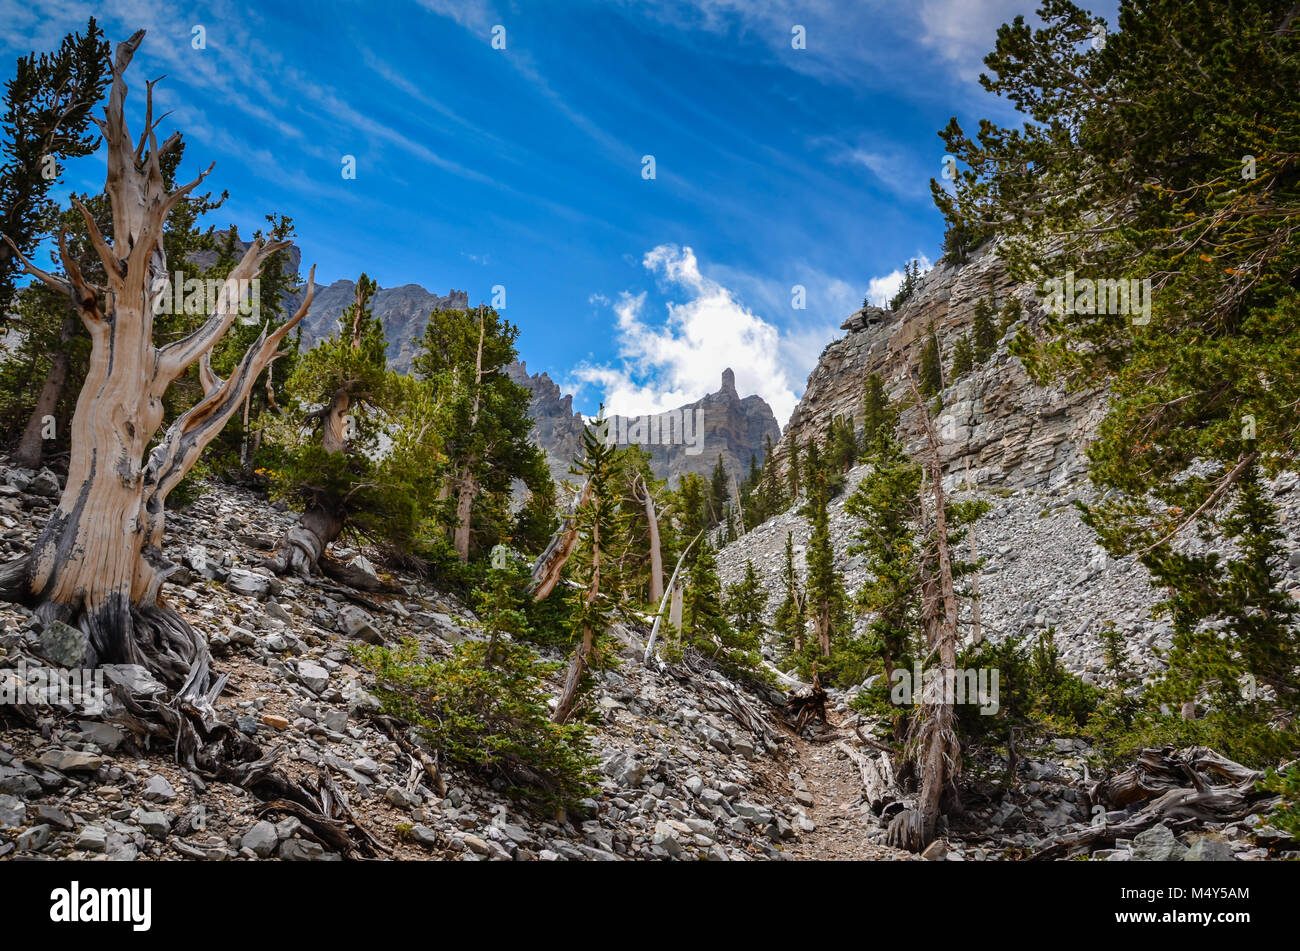 Bristlecone pines, the longest living trees, can be seen on the Bristlecone Pine Grove Trail in Great Basin National Park. Stock Photo